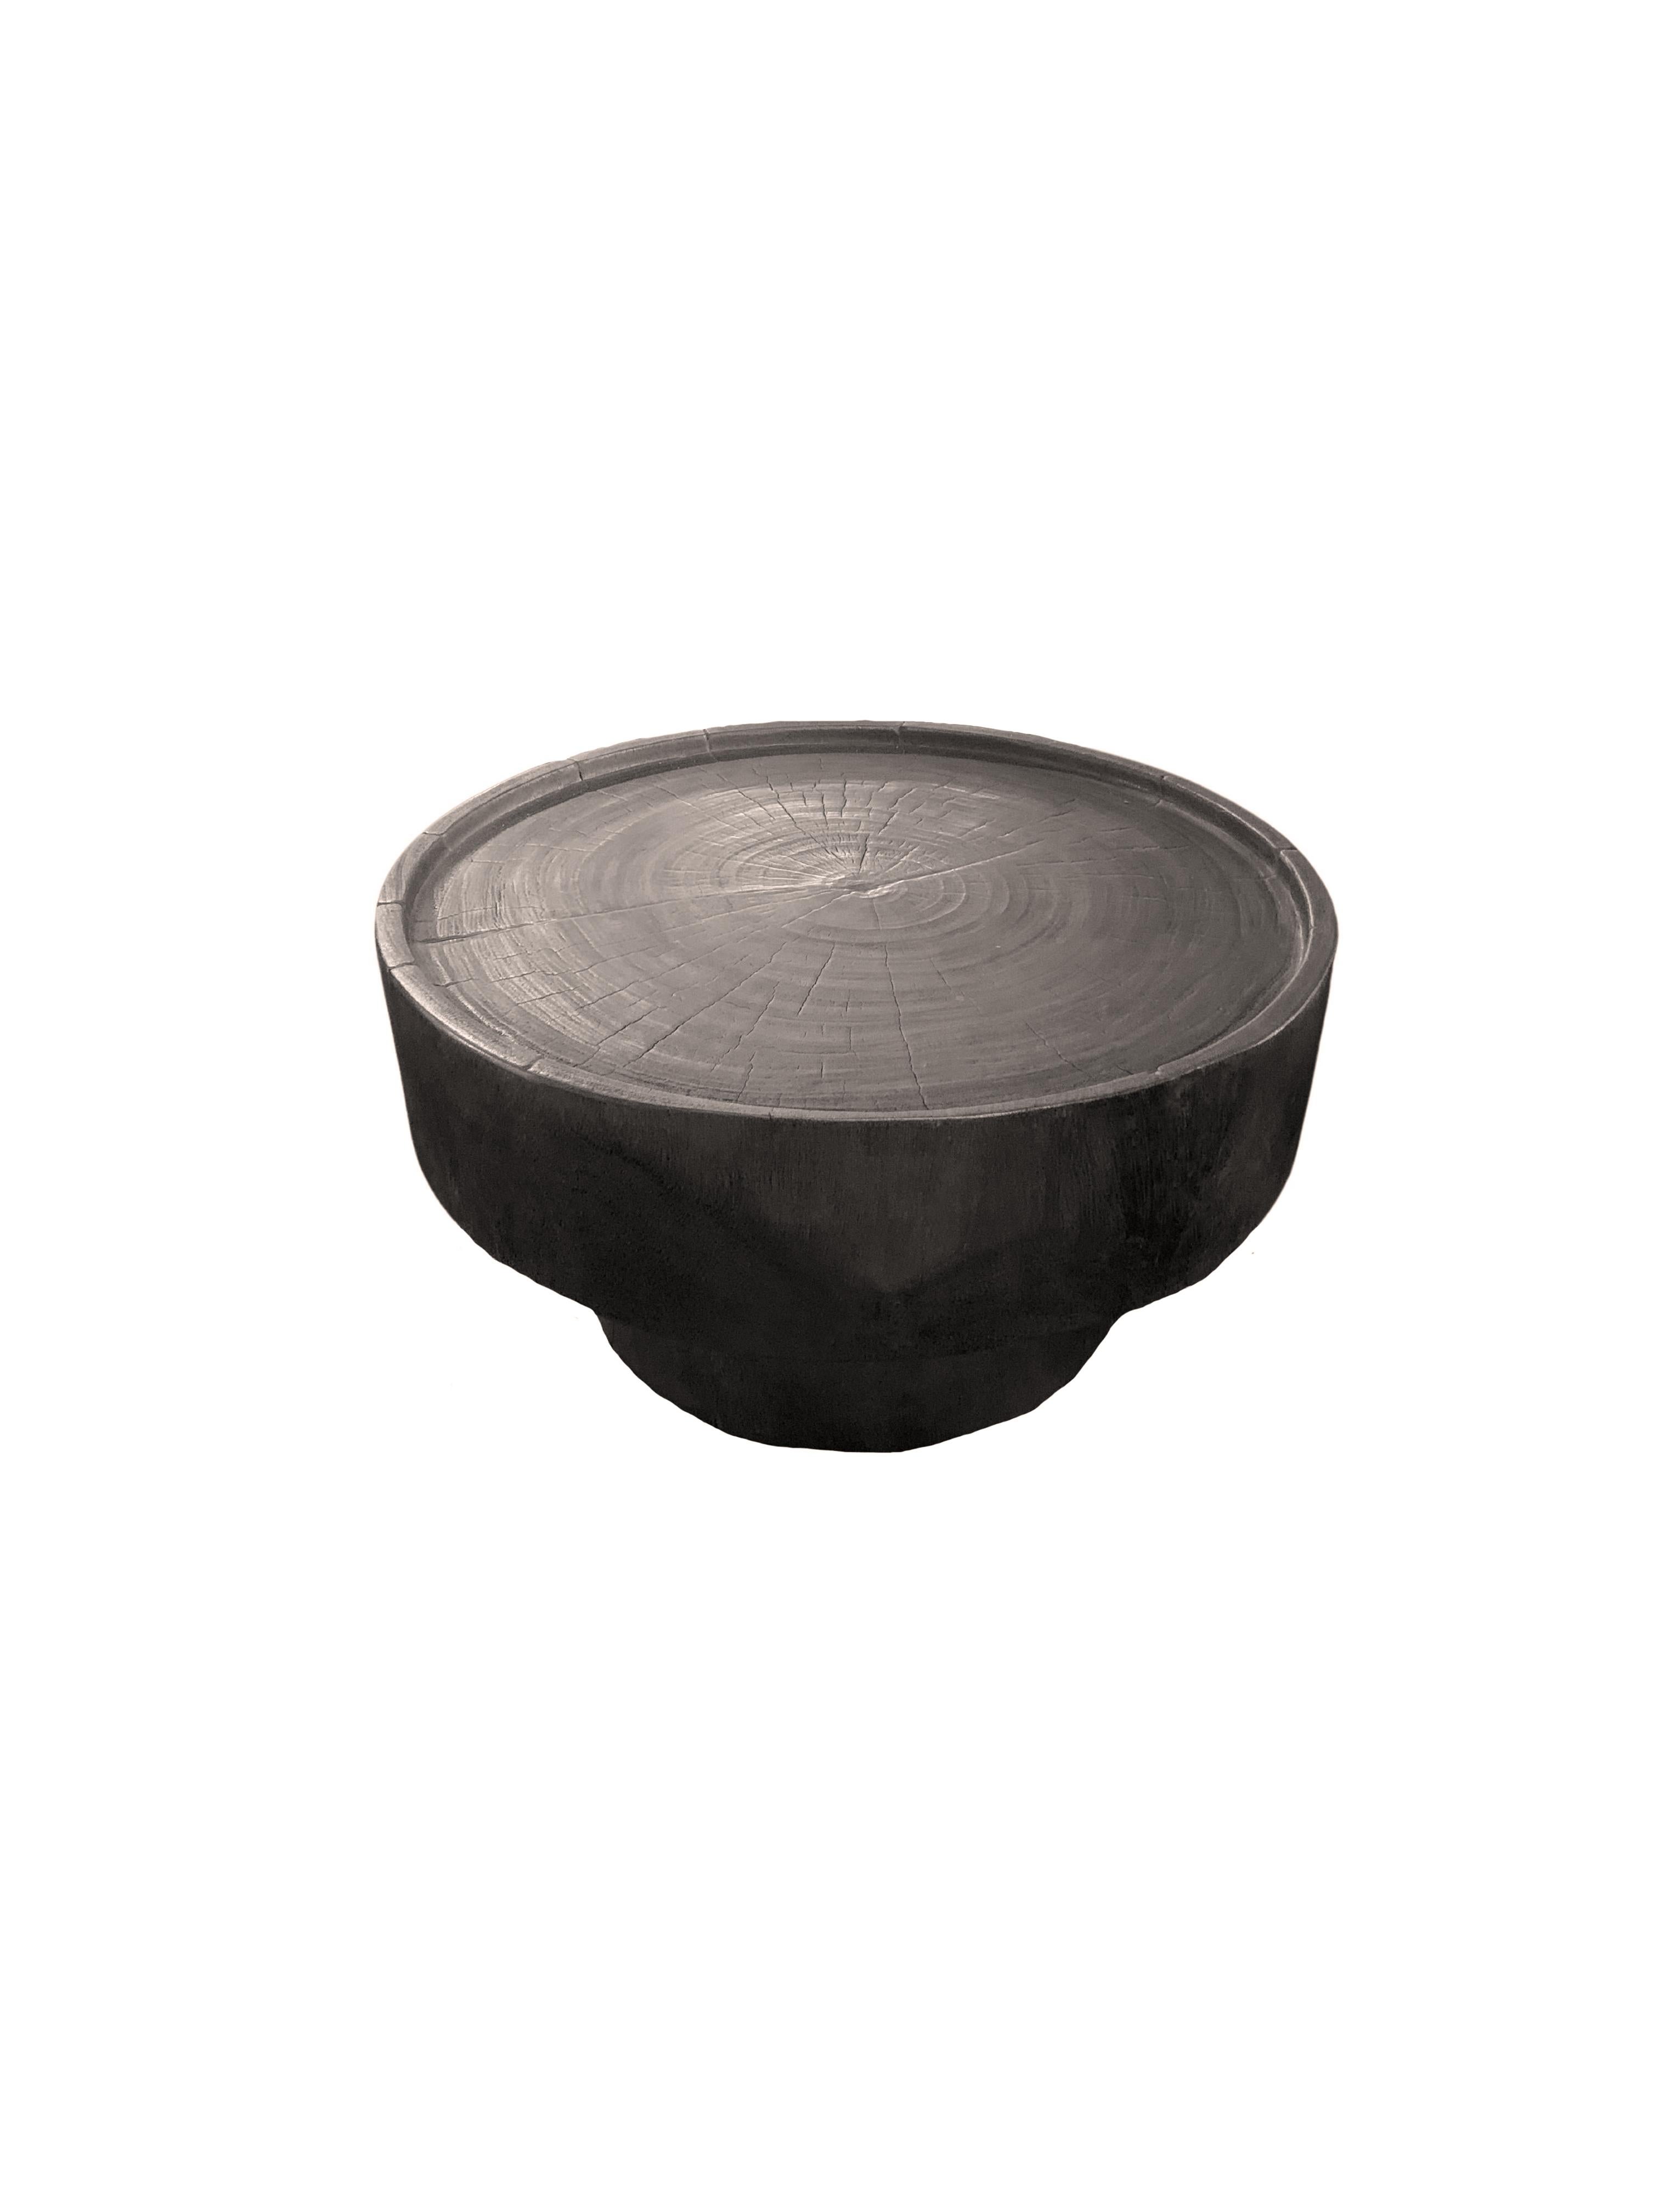 A wonderfully sculptural round side table. Its rich black pigment was achieved through burning the wood three times. Its neutral pigment and subtle wood texture makes it perfect for any space. A uniquely sculptural and versatile piece certain to